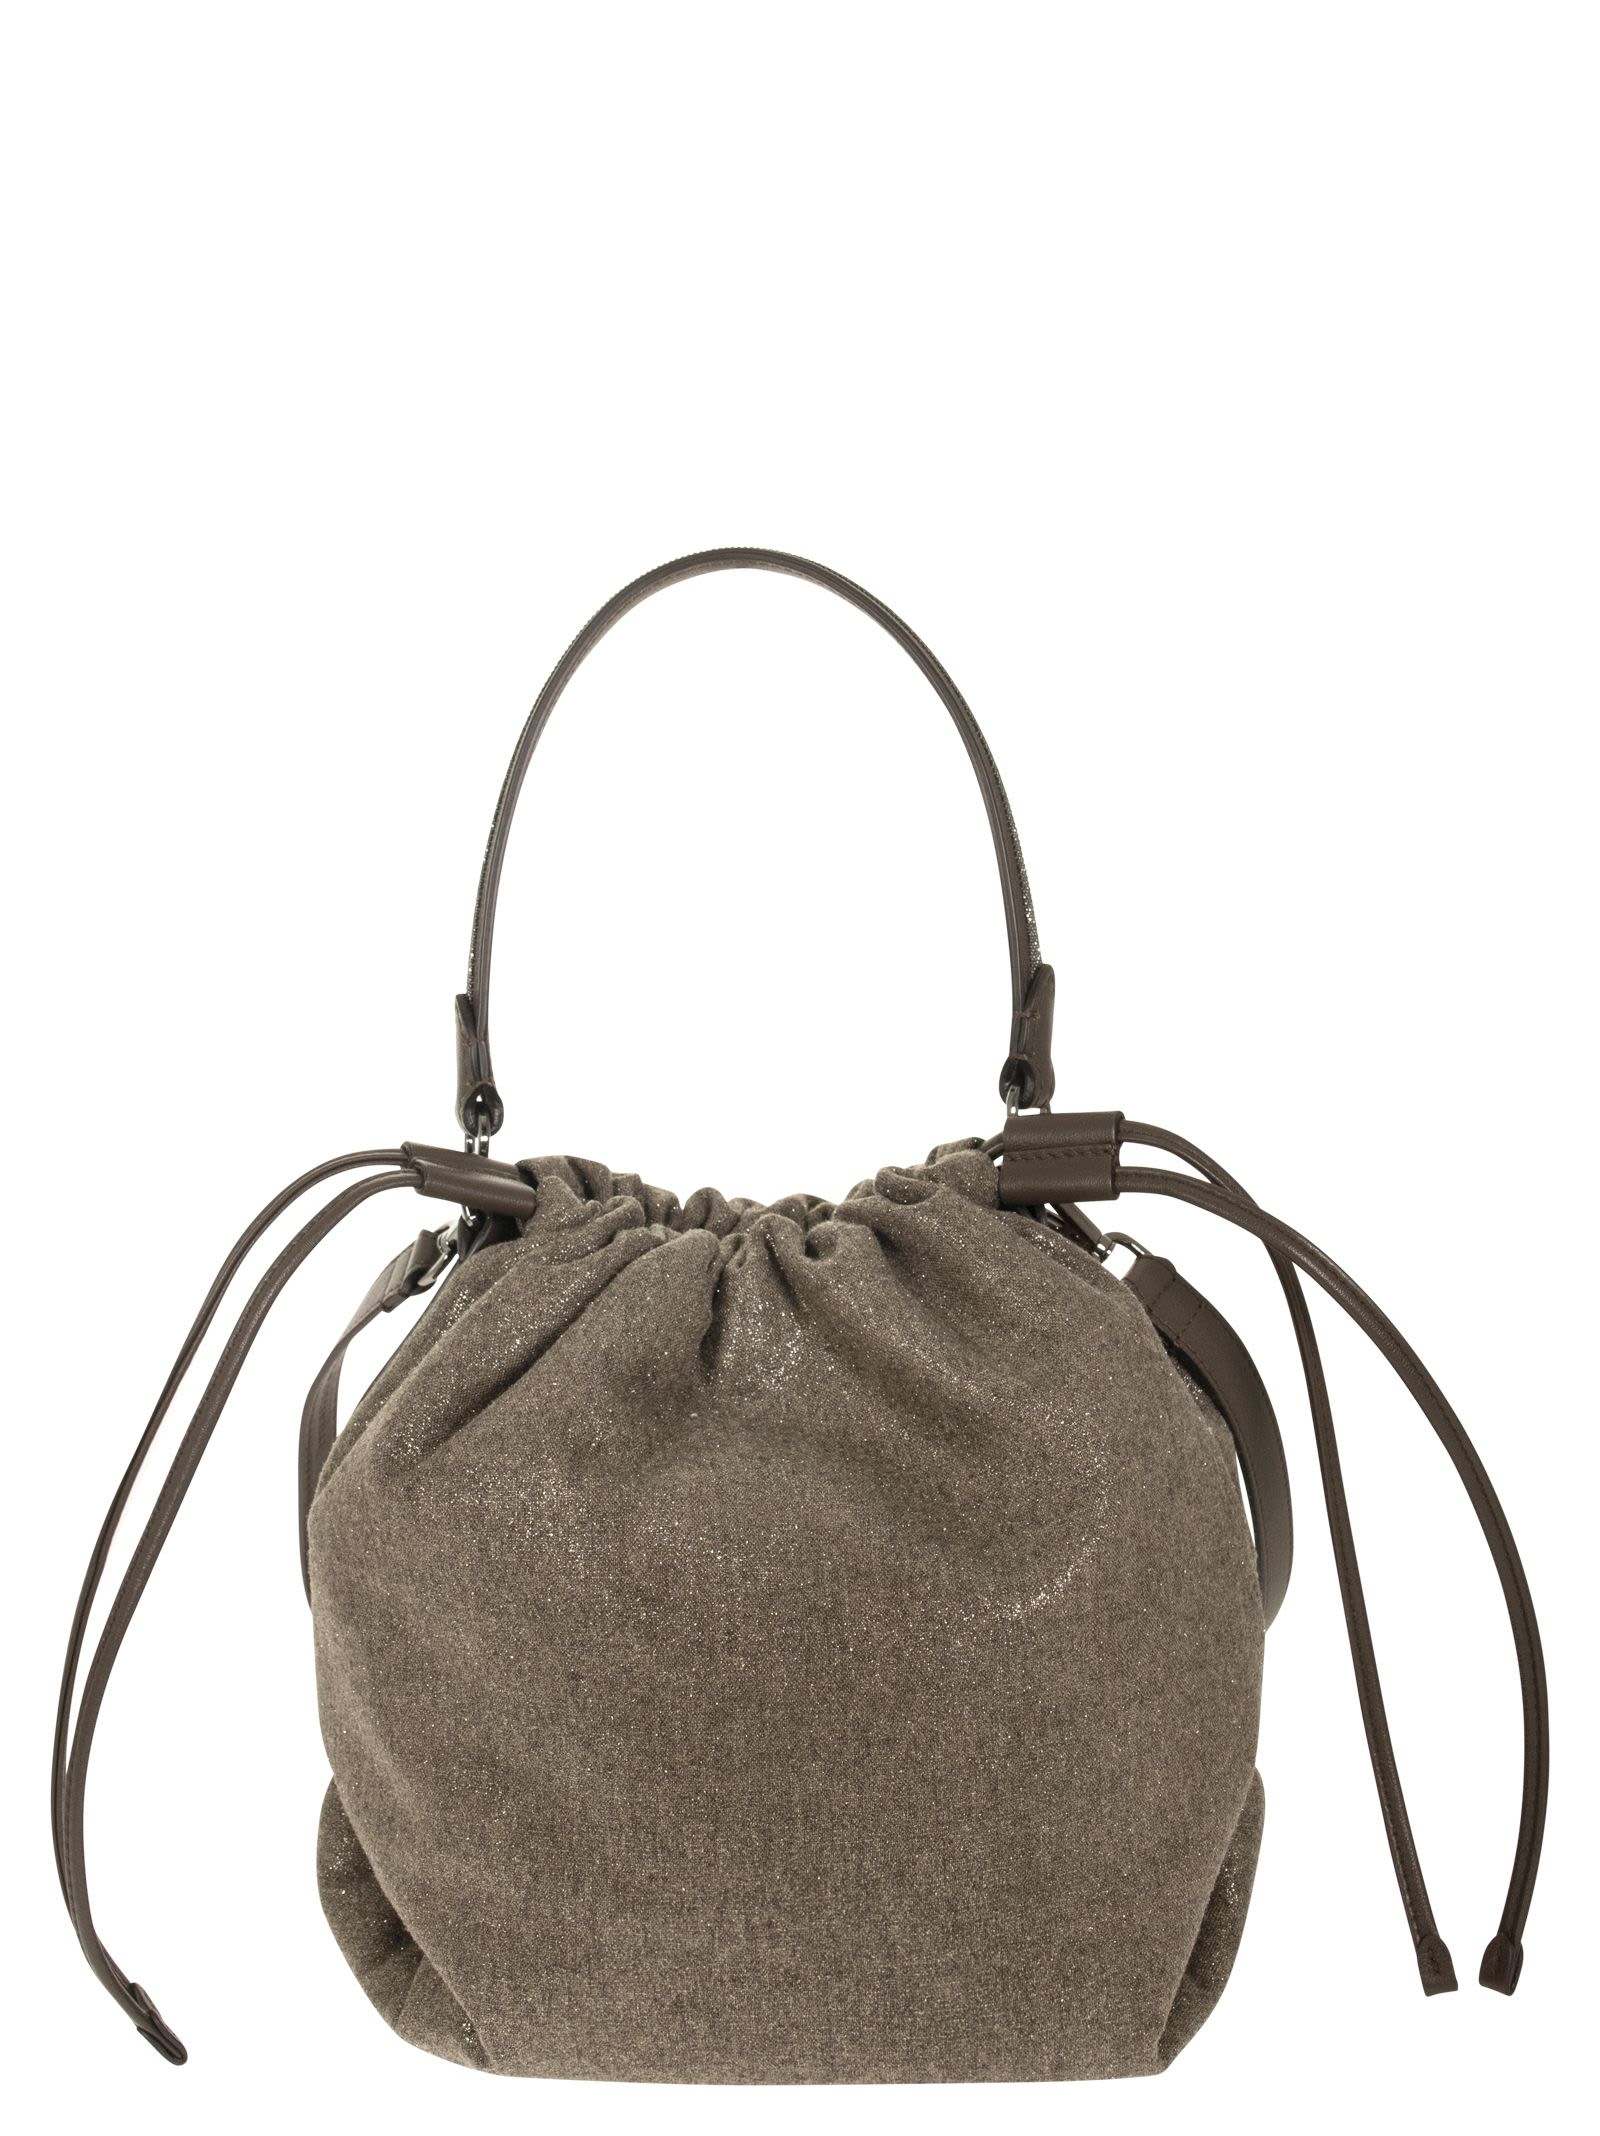 Brunello Cucinelli Bucket Bag In Wool And Viscose Blend